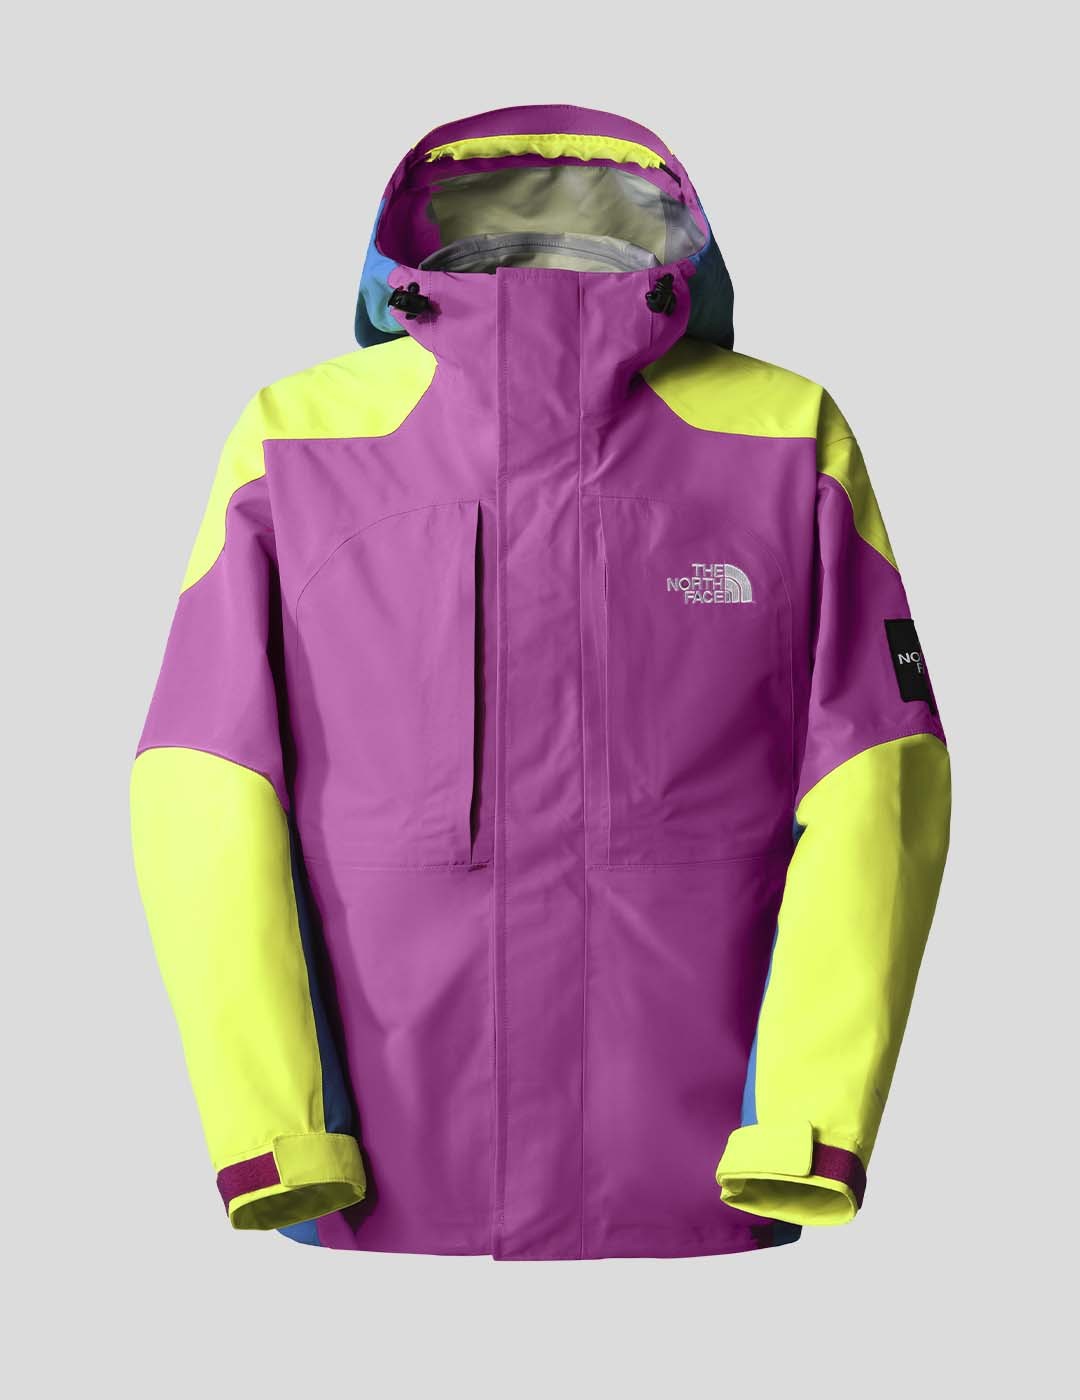 CAZADORA THE NORTH FACE DRYVENT 3L CARDUELIS JACKET  PURPLE CACTUS FLOWER/LED YELLOW/SUPERSONIC BLUE